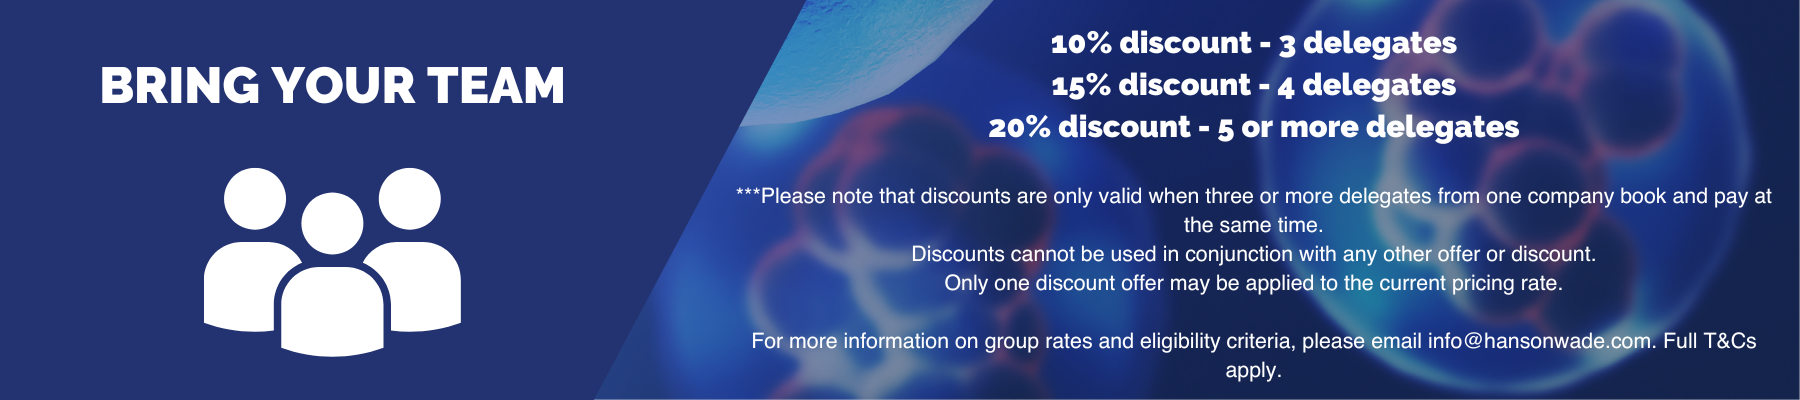 Group Discounts banner